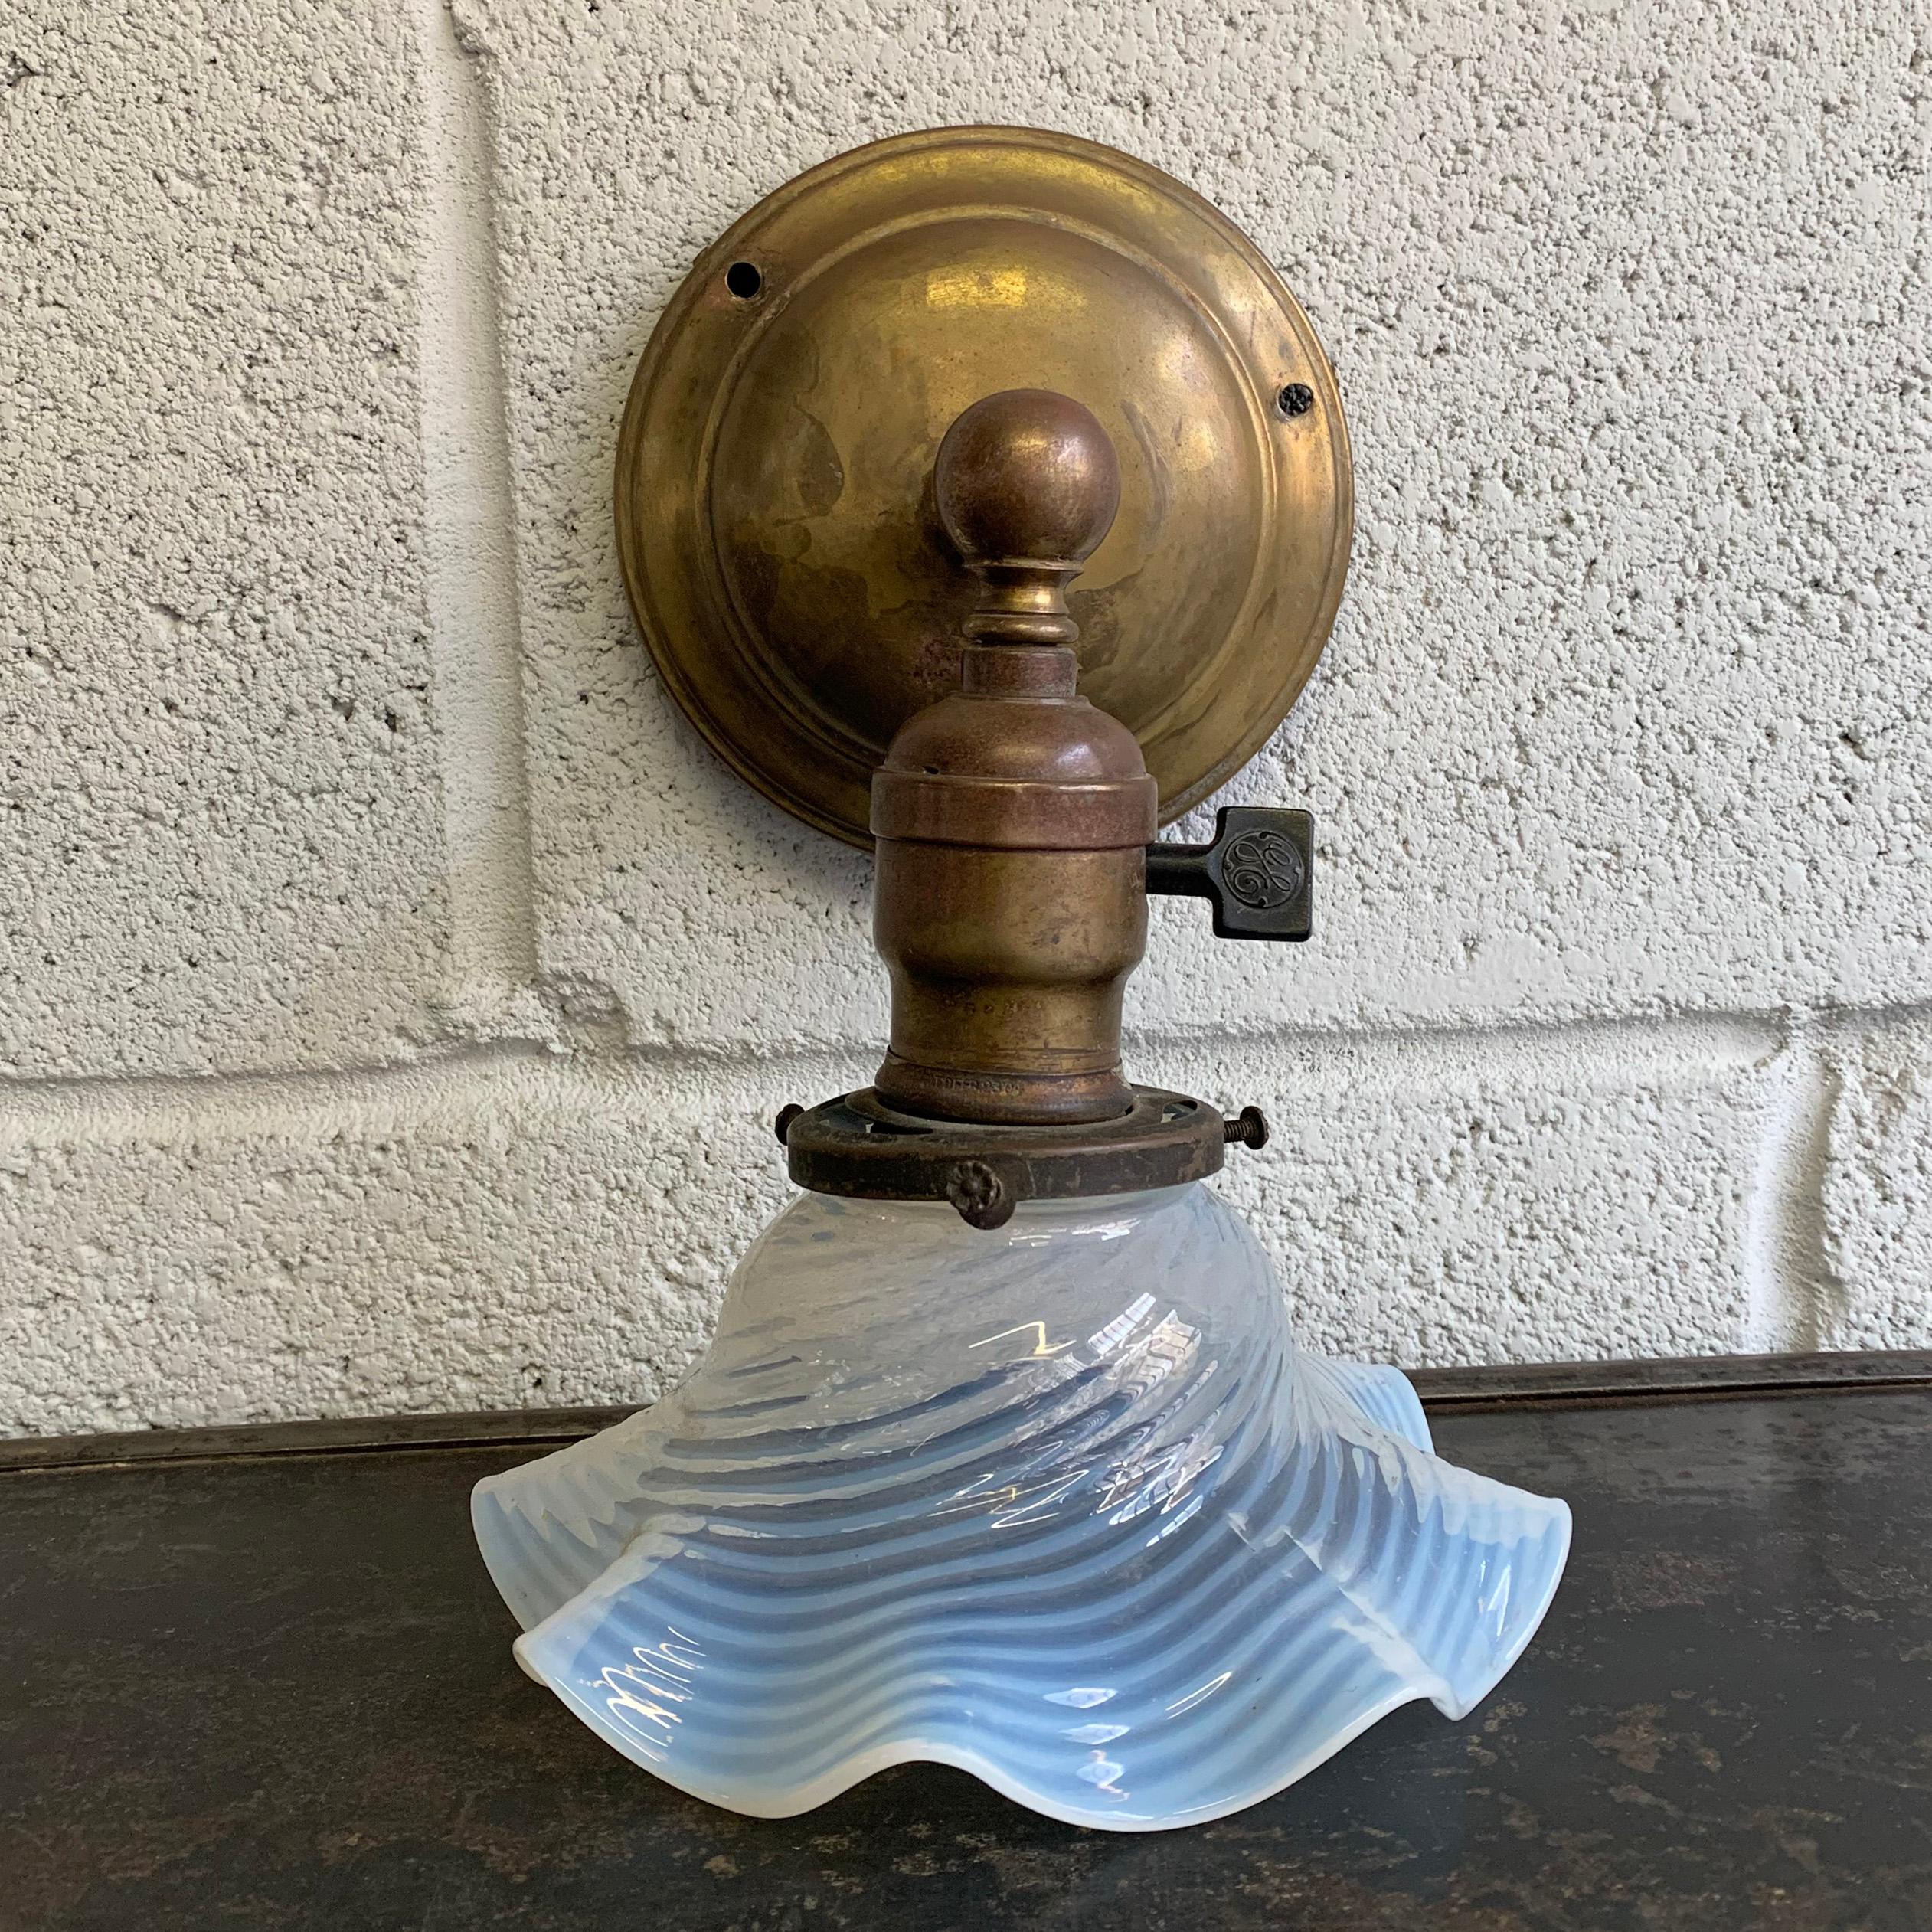 Early 20th century, antique, industrial, brass wall sconce light features a pie crust ruffle, opaline shade and paddle switch. The shade diameter is 6 inches and the backplate is 5 inches diameter.